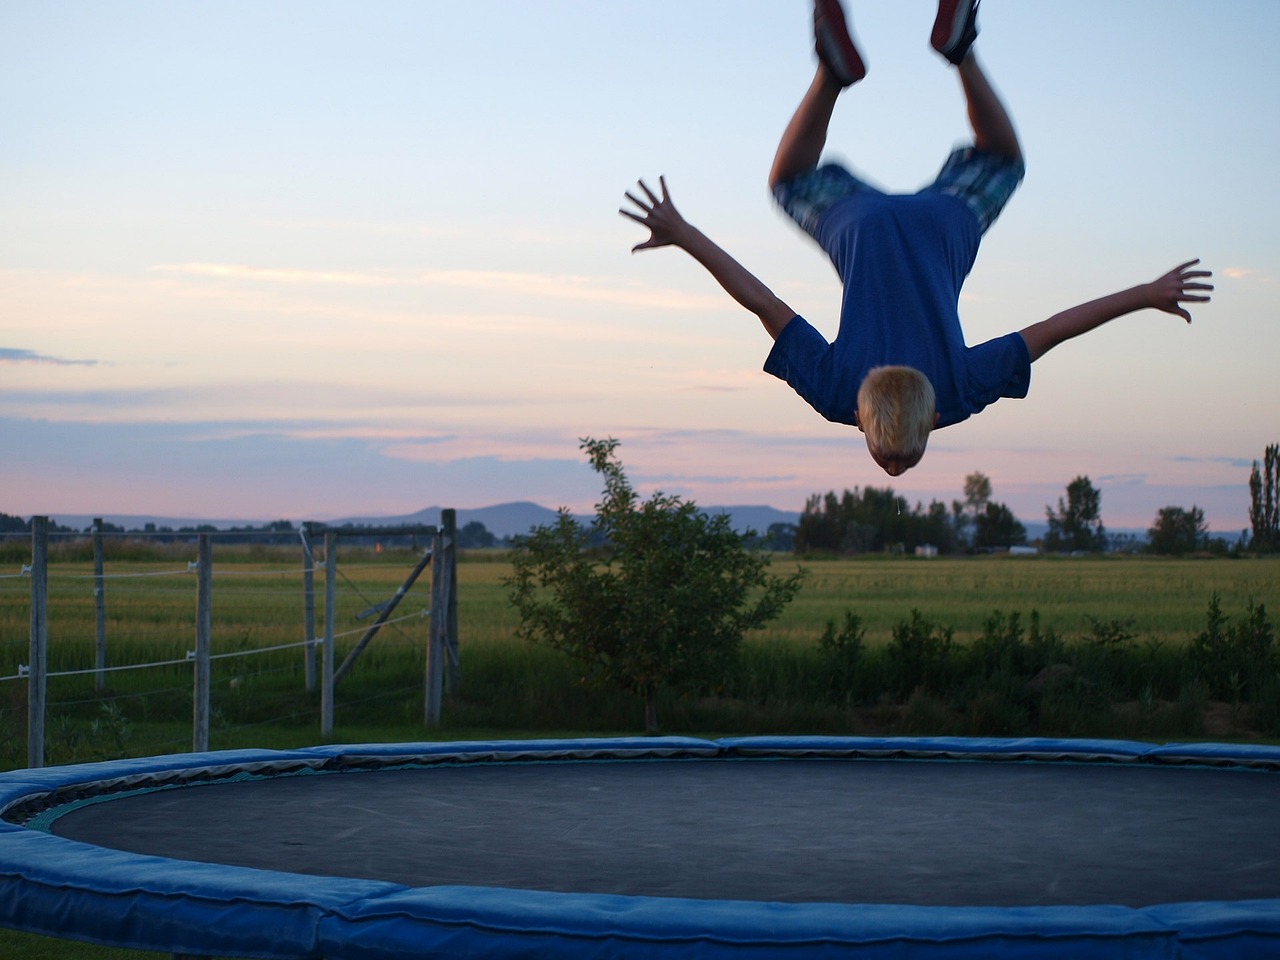 Top Reasons for Having a Home Mini Trampoline